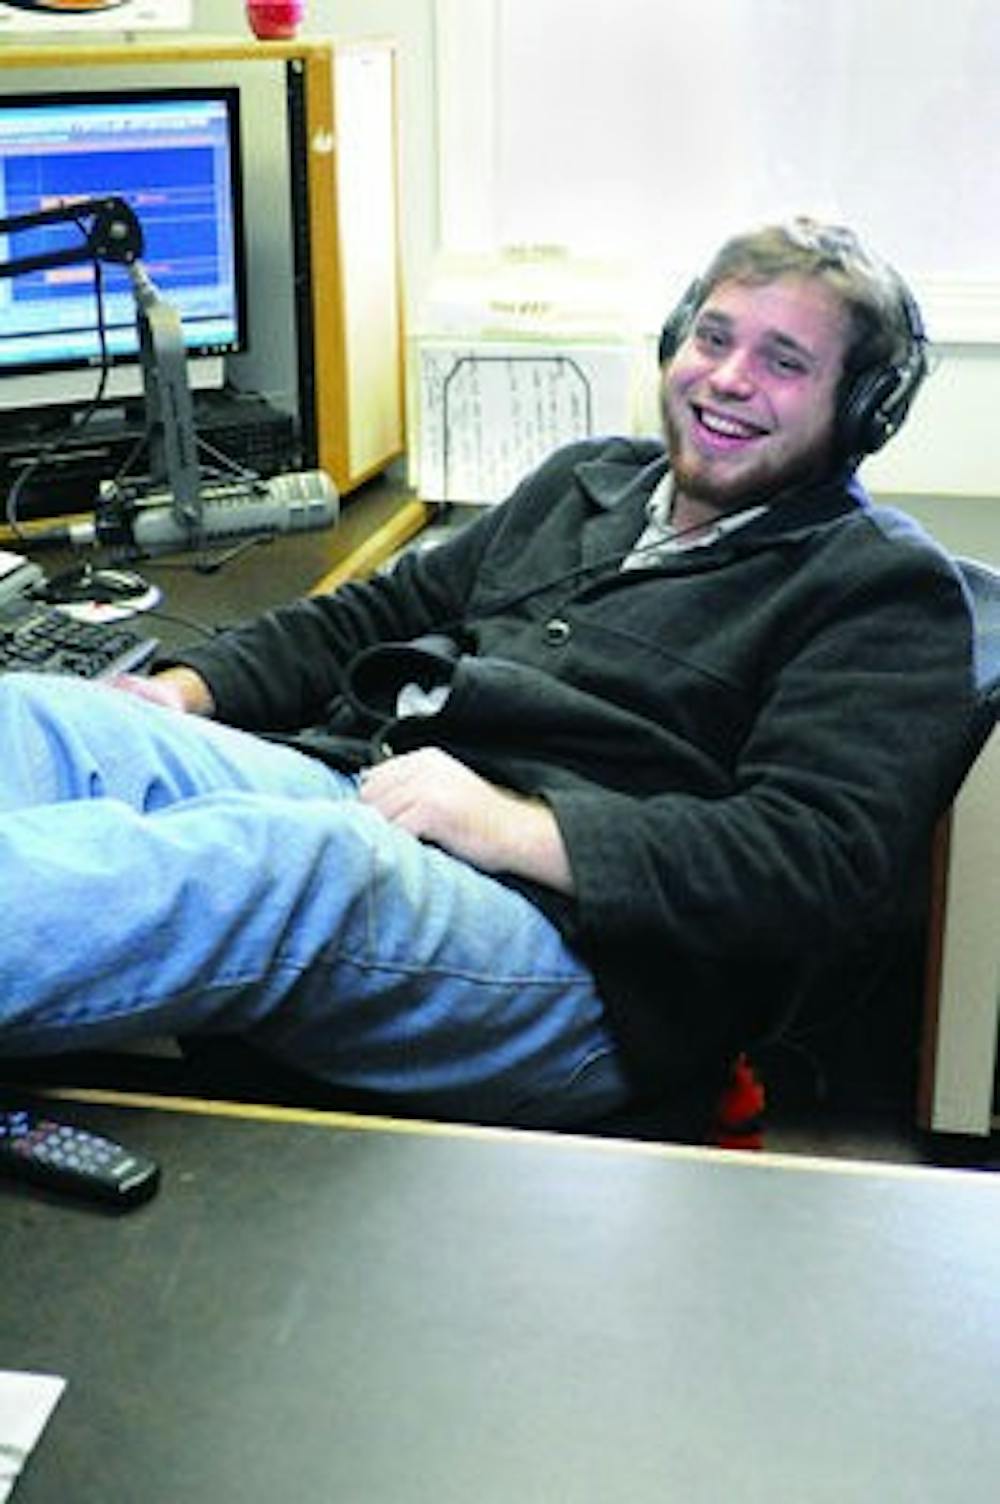 Mix 96.7's program director Donny Blankenship relaxes behind the mic. Blankenship also hosts the station's weekday morning show from 6-10 a.m. (Christen Harned / ASSISTANT PHOTO EDITOR)